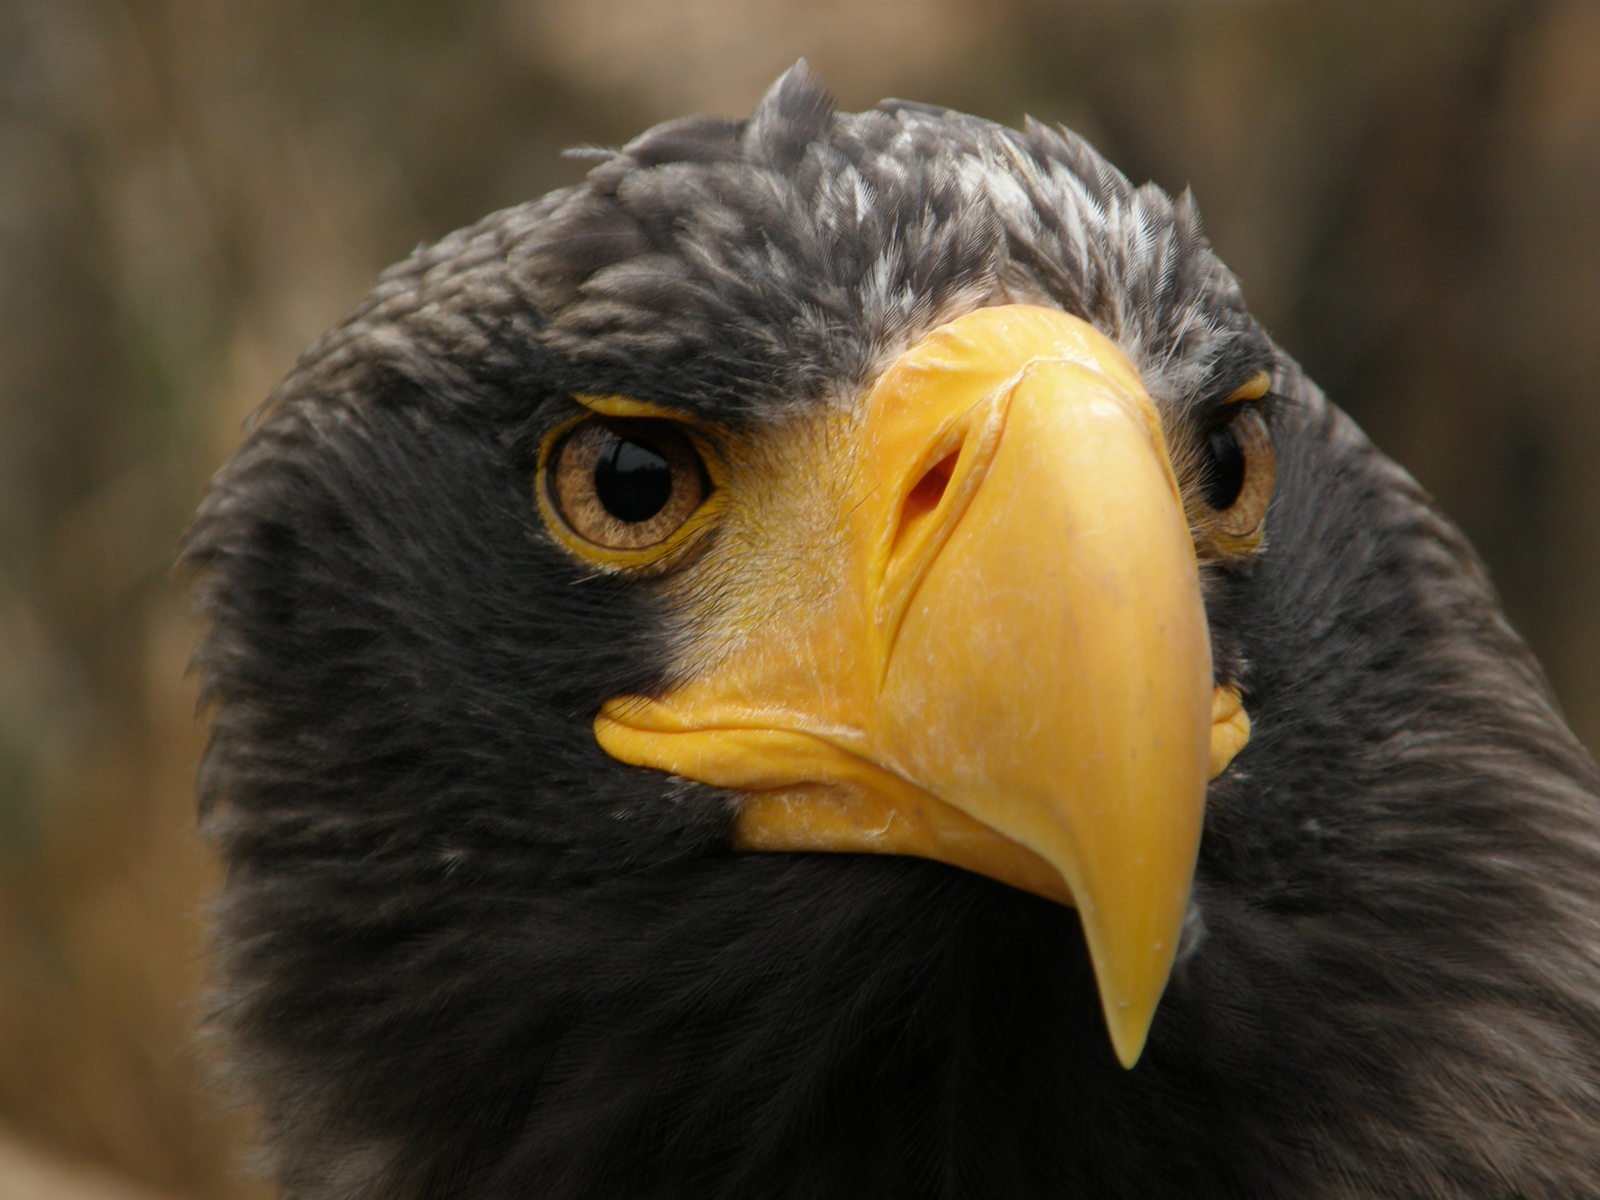 a large, black eagle's head with yellow eyes